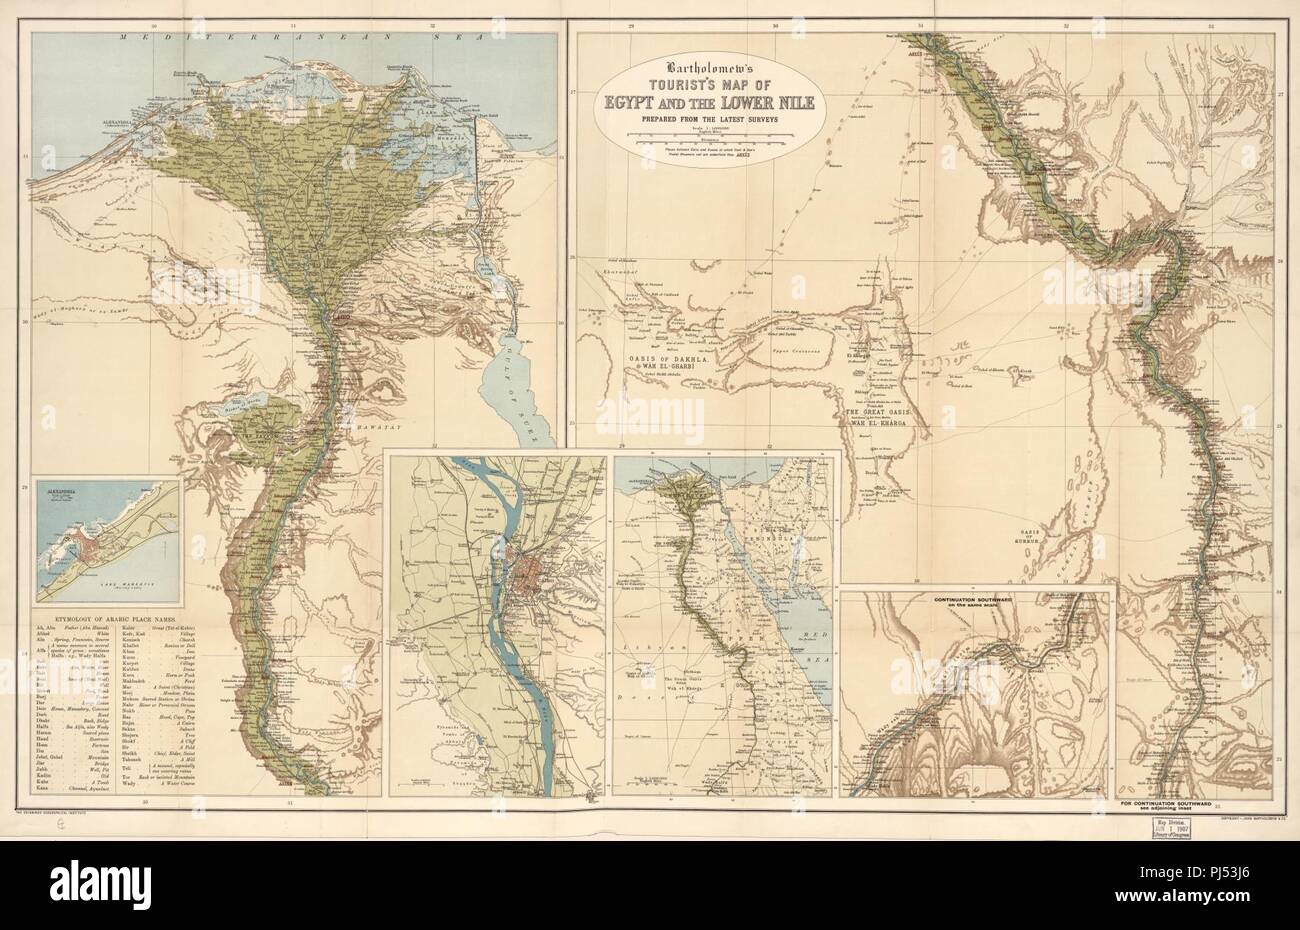 Bartholomew's tourists' map of Egypt and the Lower Nile - prepared from the latest surveys. Stock Photo